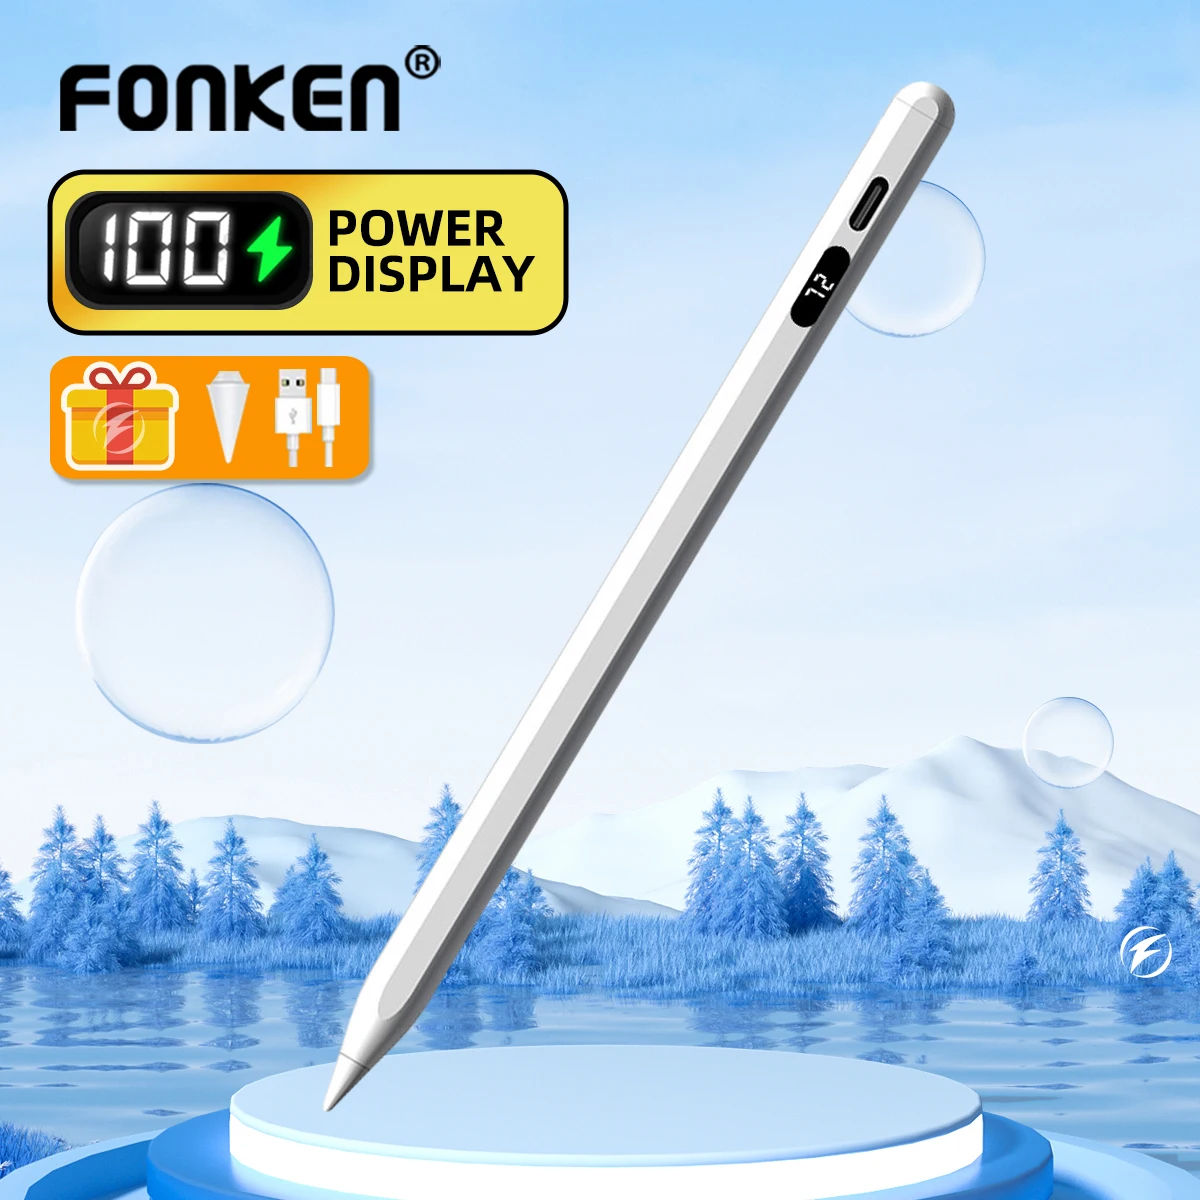 Universal Power Display Stylus Pen For Android IOS Windows Touch Pen For iPad Apple Pencil Phone Drawing Tablet Stylus Touch Pen